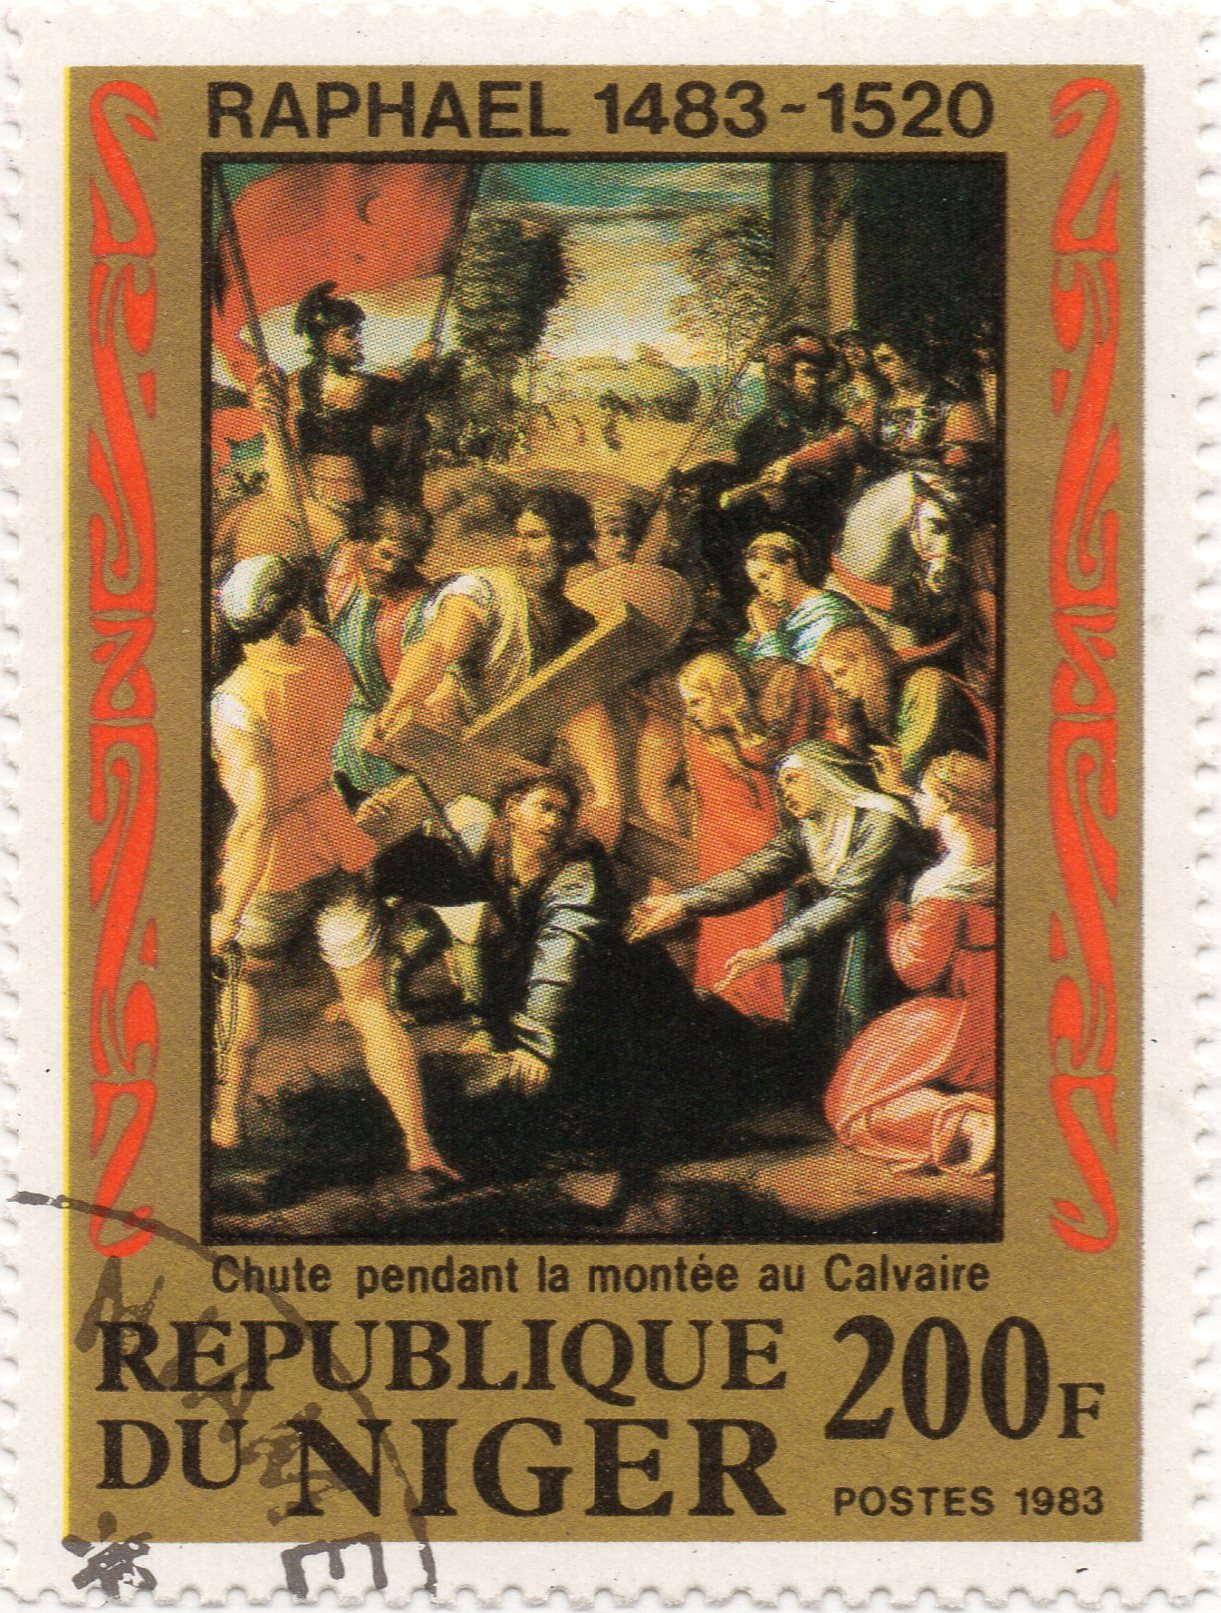 nft #5 Christ Falling on the Way to Calvary Raphael 1483 - 1520 Republic of Niger 200 f. postes 1983